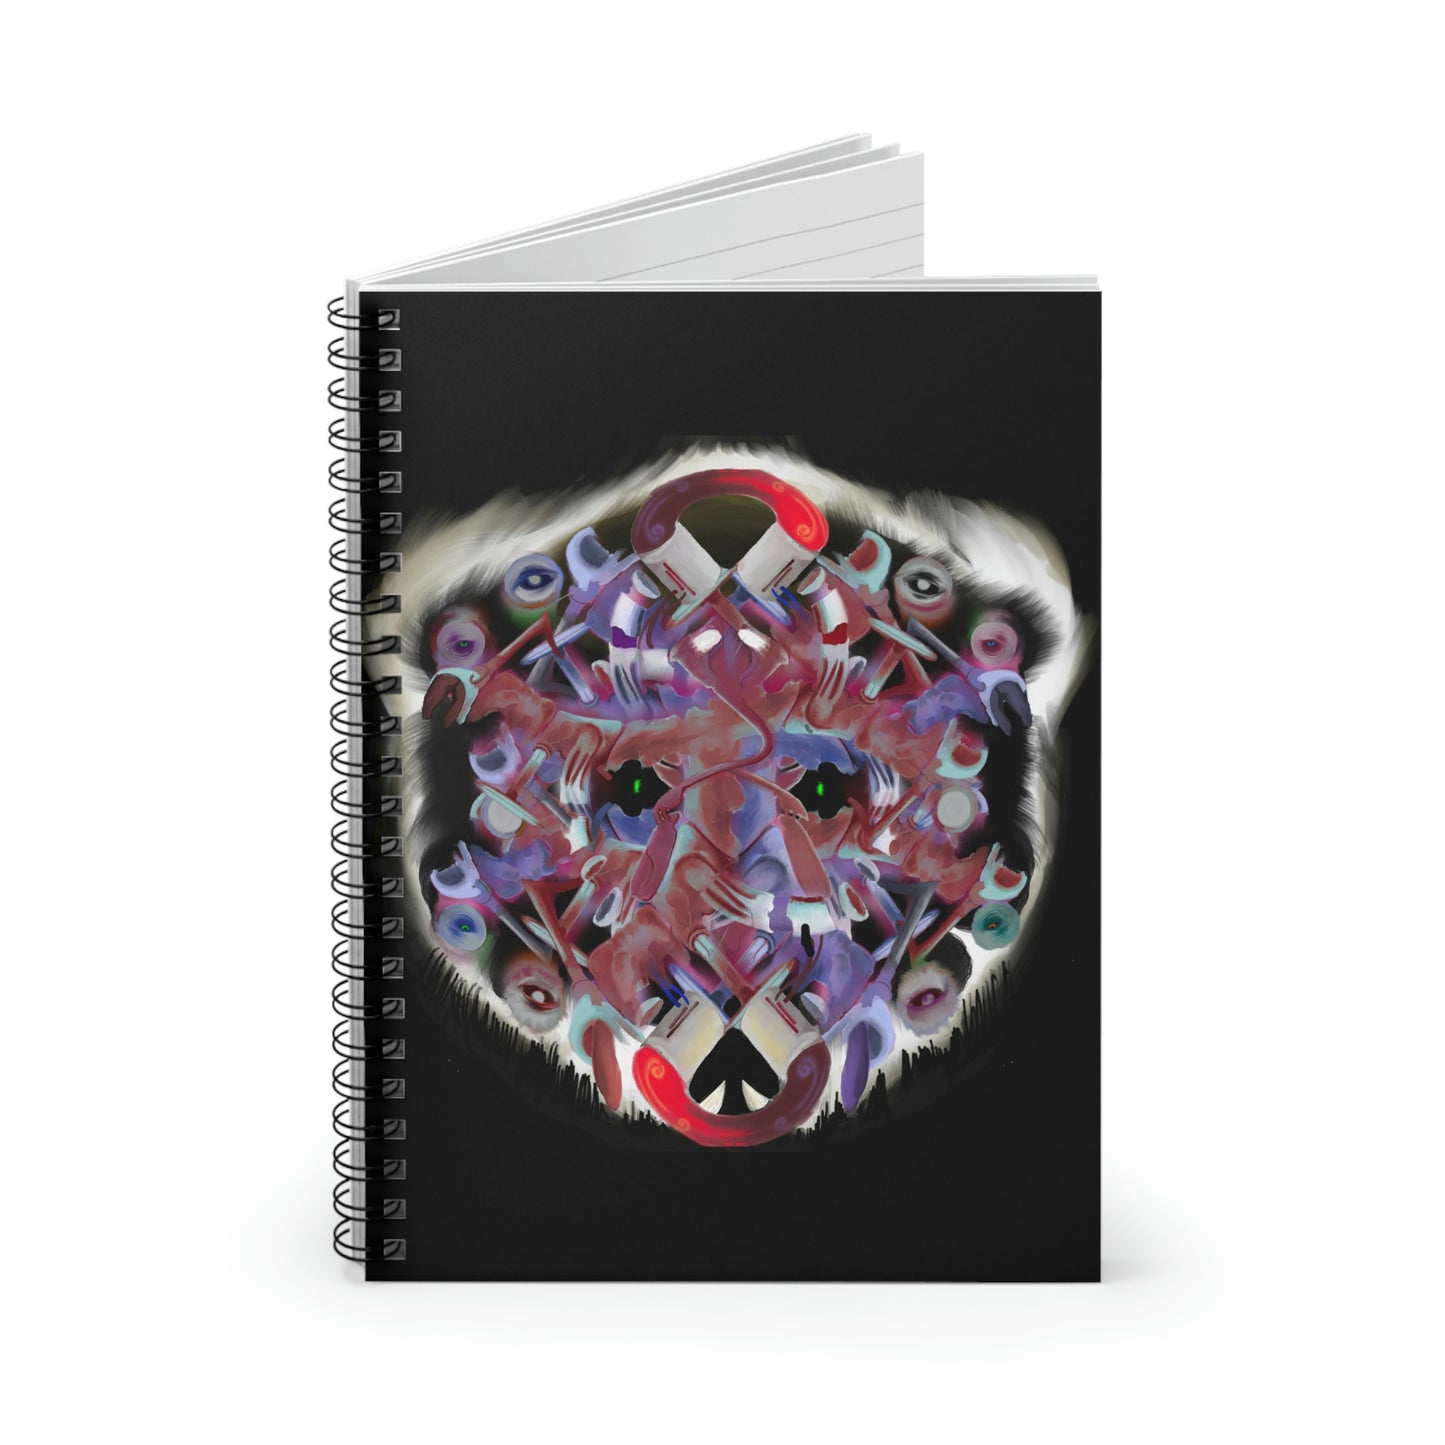 Interfaces Spiral Notebook - Ruled Line